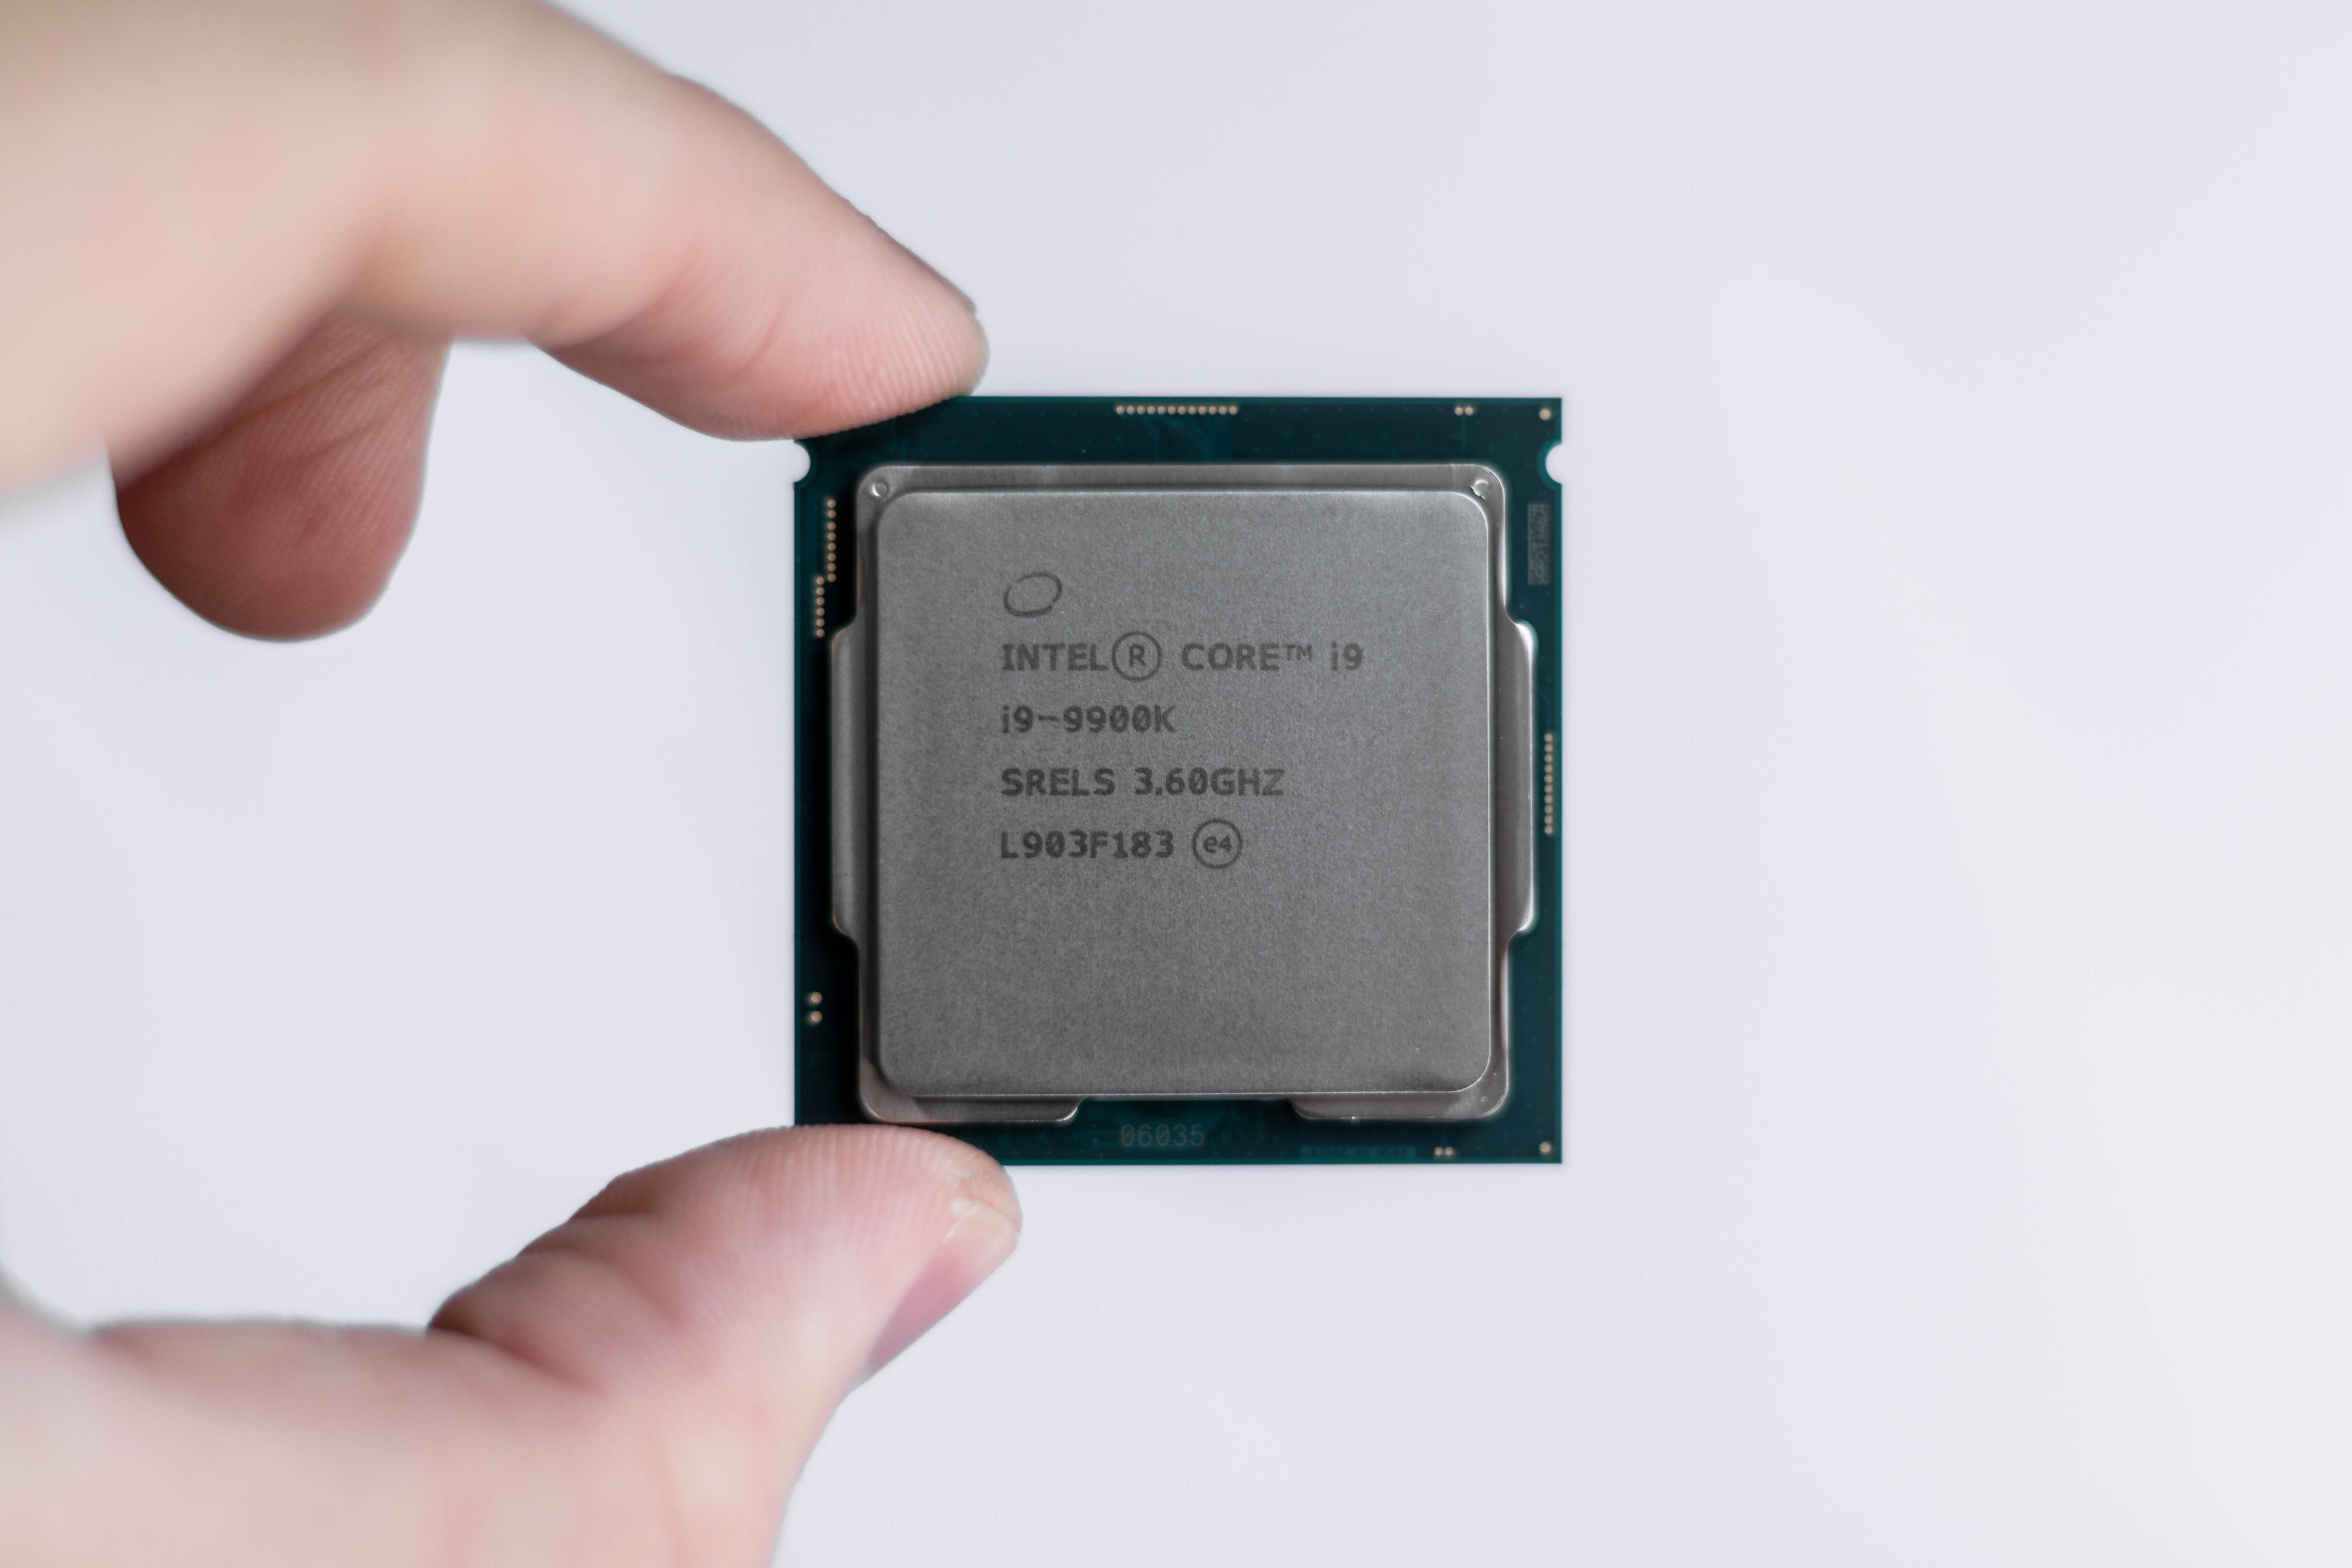 Photo of the Intel Core chip in a person's hand